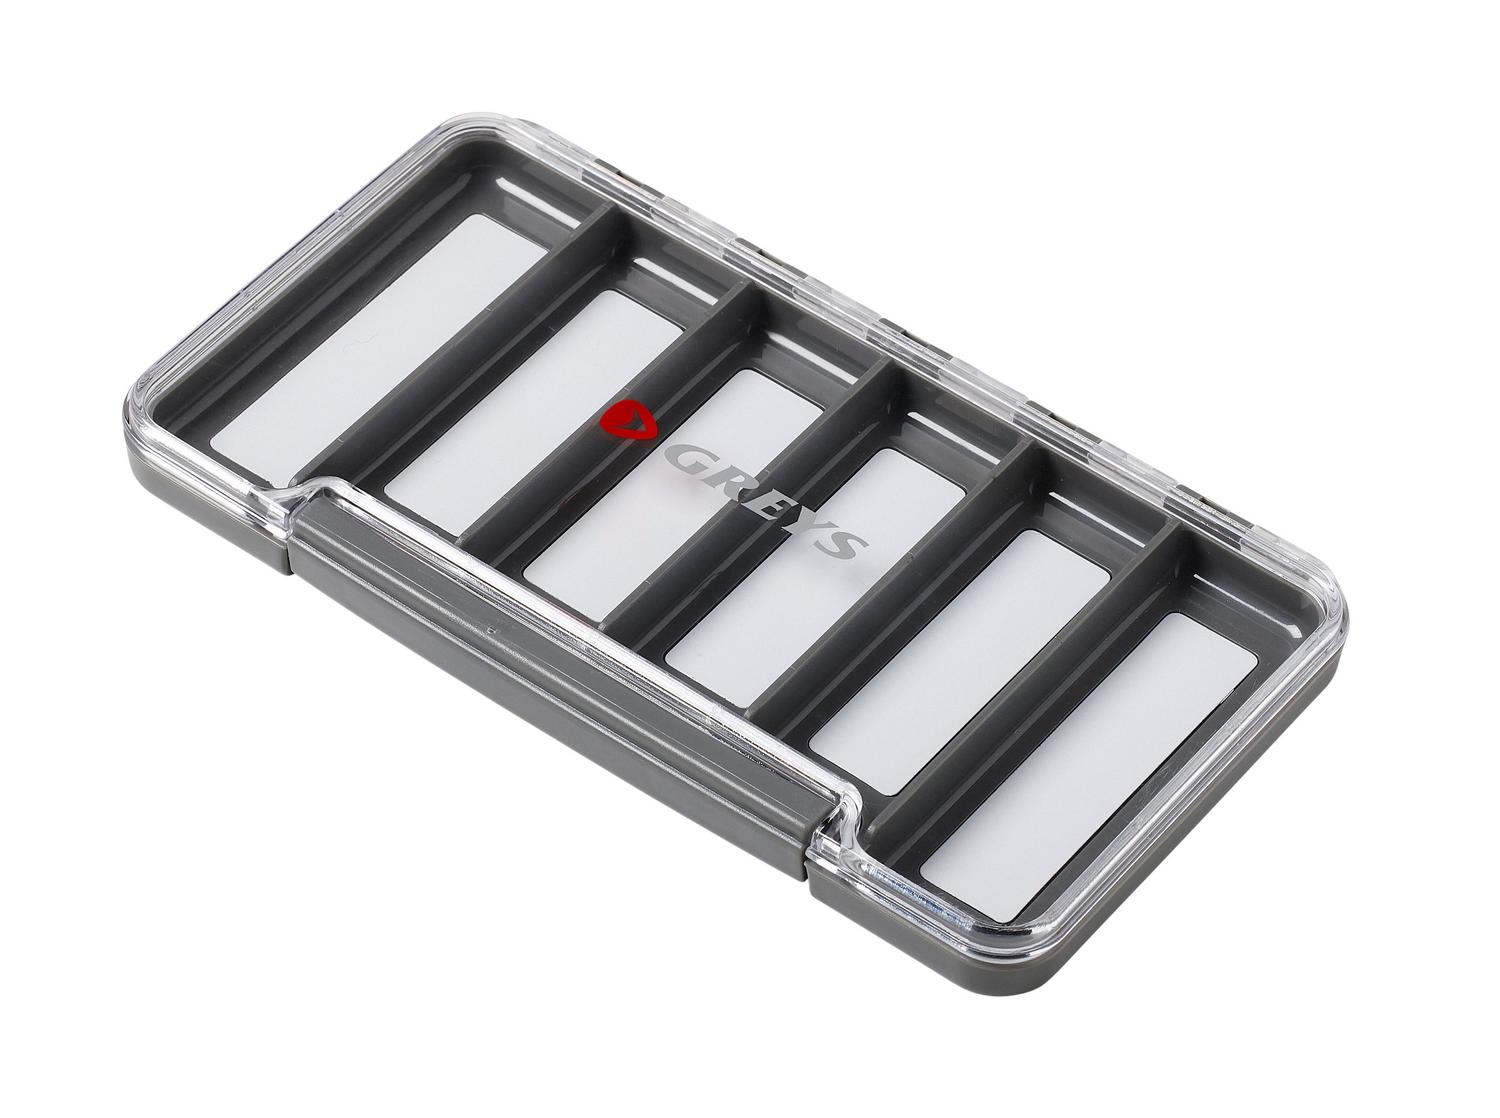 GREYS SLIM WATERPROOF FLY BOX - 6 COMPARTMENTS